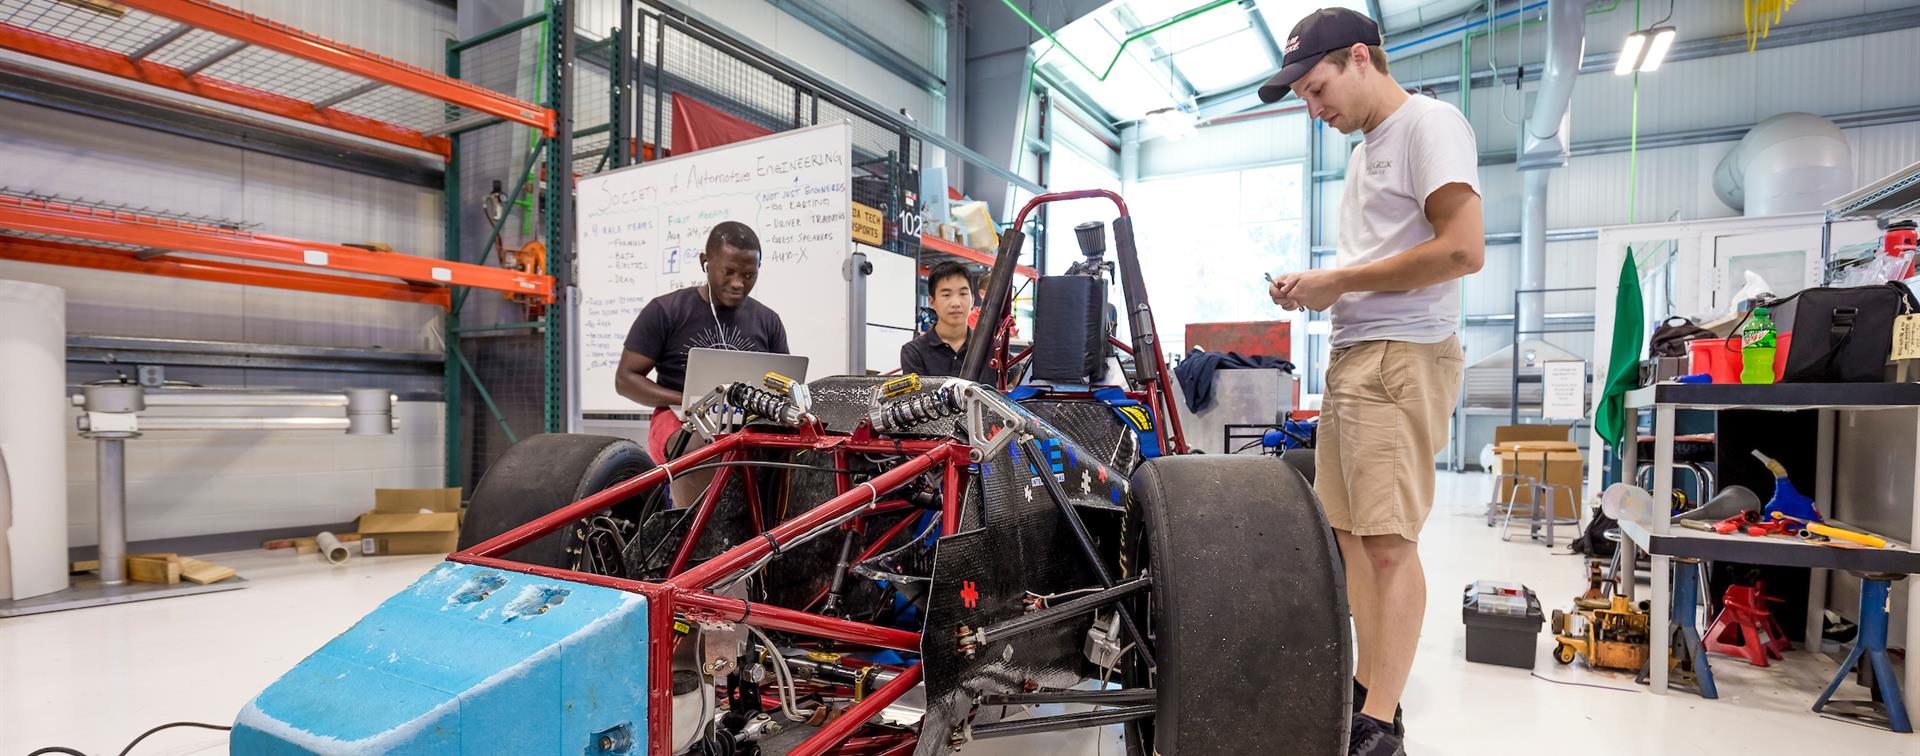 Photo of three students working on a vehicle in an automotive engineering workshop